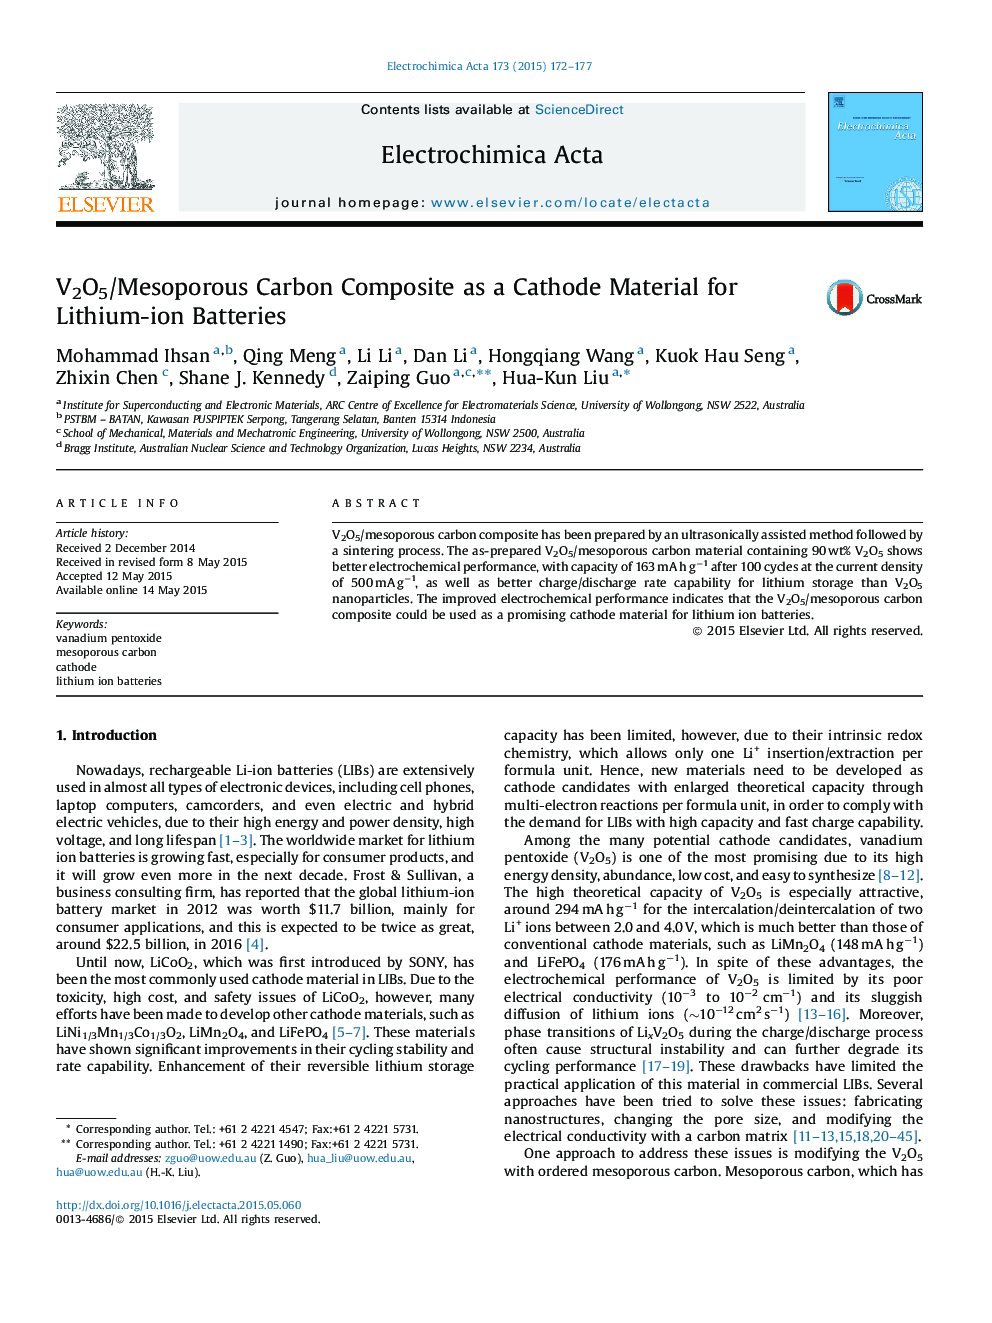 V2O5/Mesoporous Carbon Composite as a Cathode Material for Lithium-ion Batteries